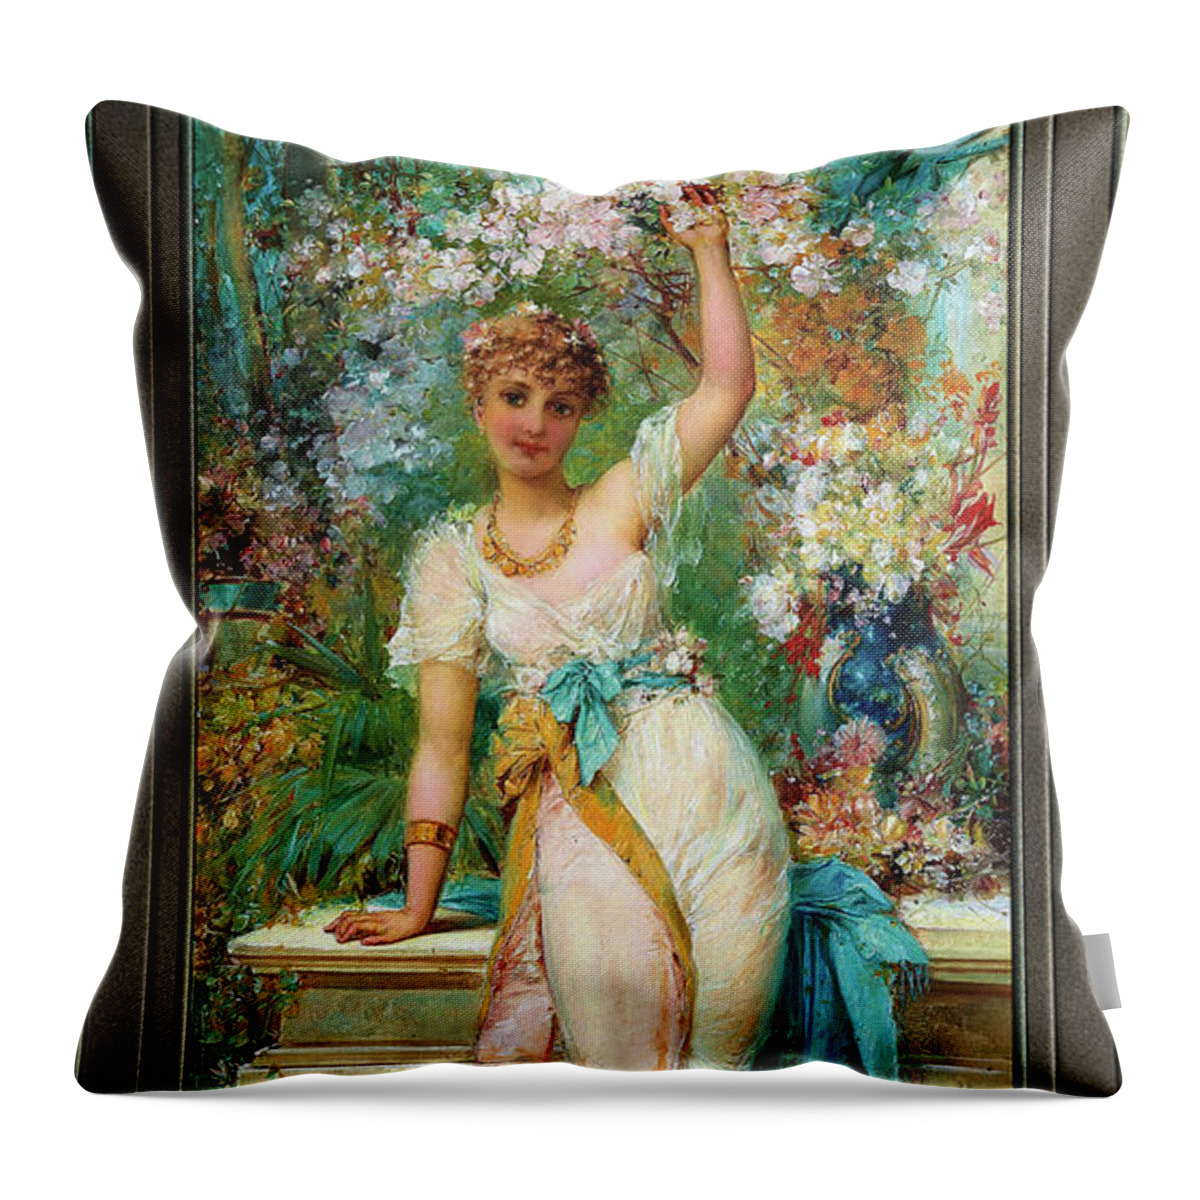 Allegory Of Spring Throw Pillow featuring the painting Allegory Of Spring by Joseph Bernard by Rolando Burbon